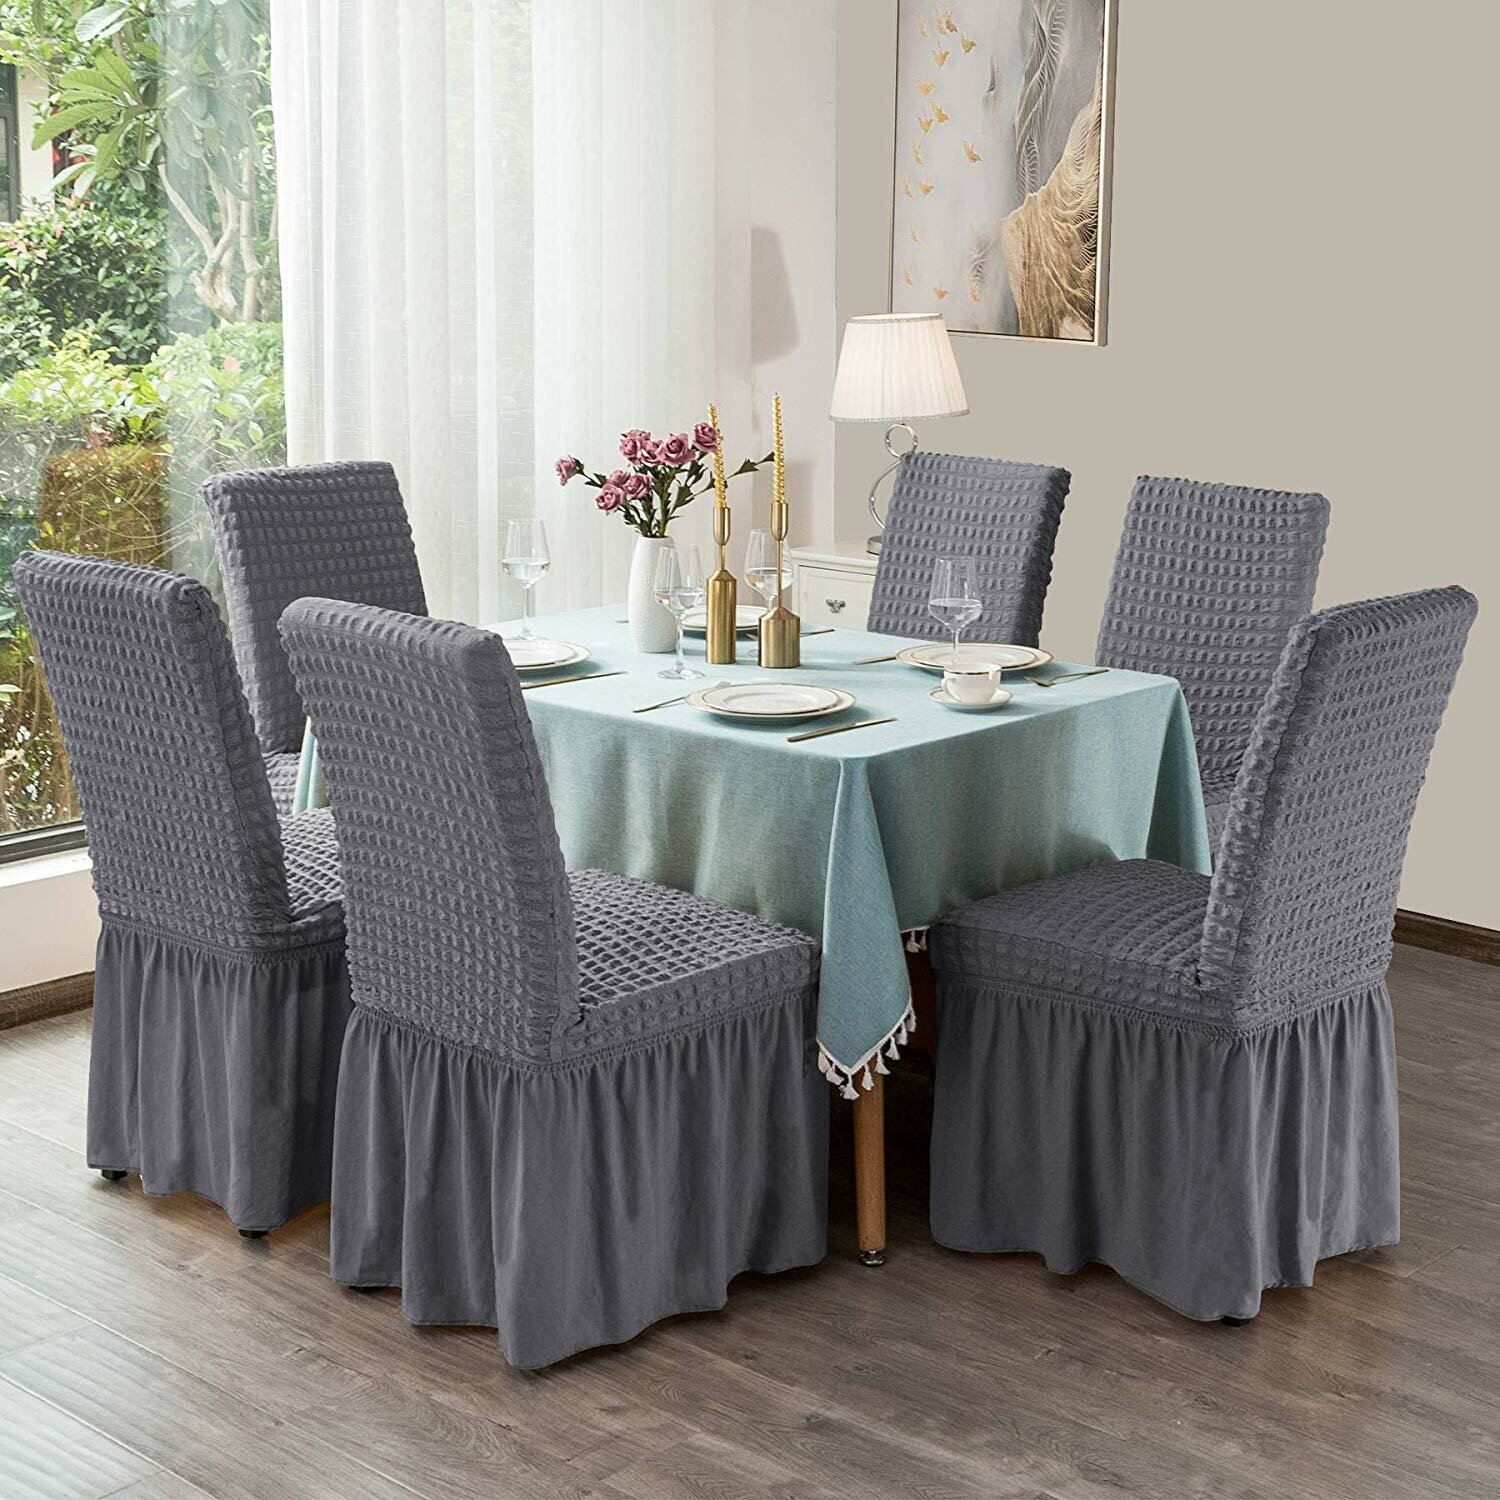 Modern dining chair covers with full coverage